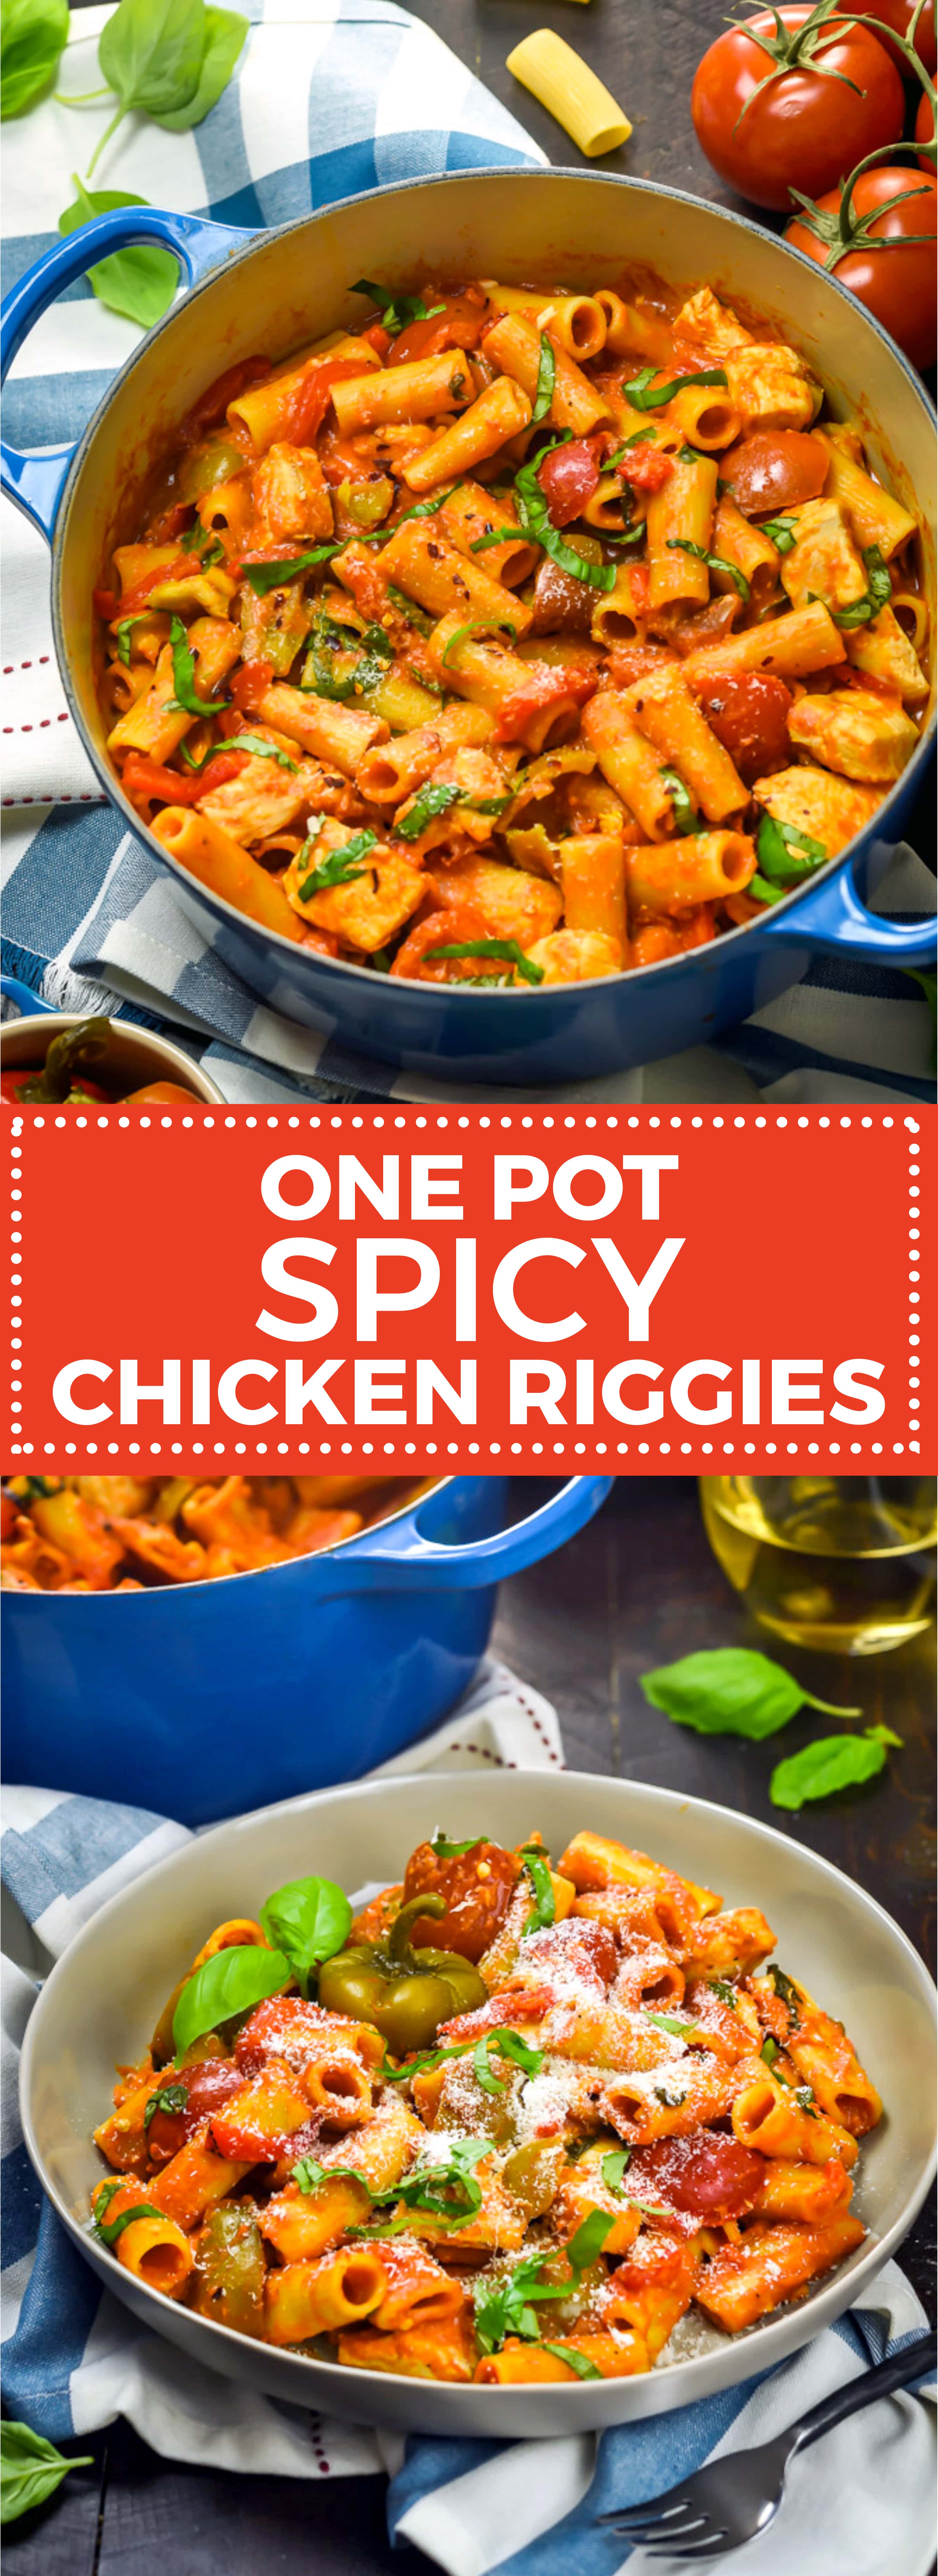 One Pot Spicy Chicken Riggies. That's right, this delicious meal is made in just one pot, from cooking the chicken to making the sauce, to boiling the pasta! And you won't believe how insanely delicious it turns out. One of my favorite recipes of all time.